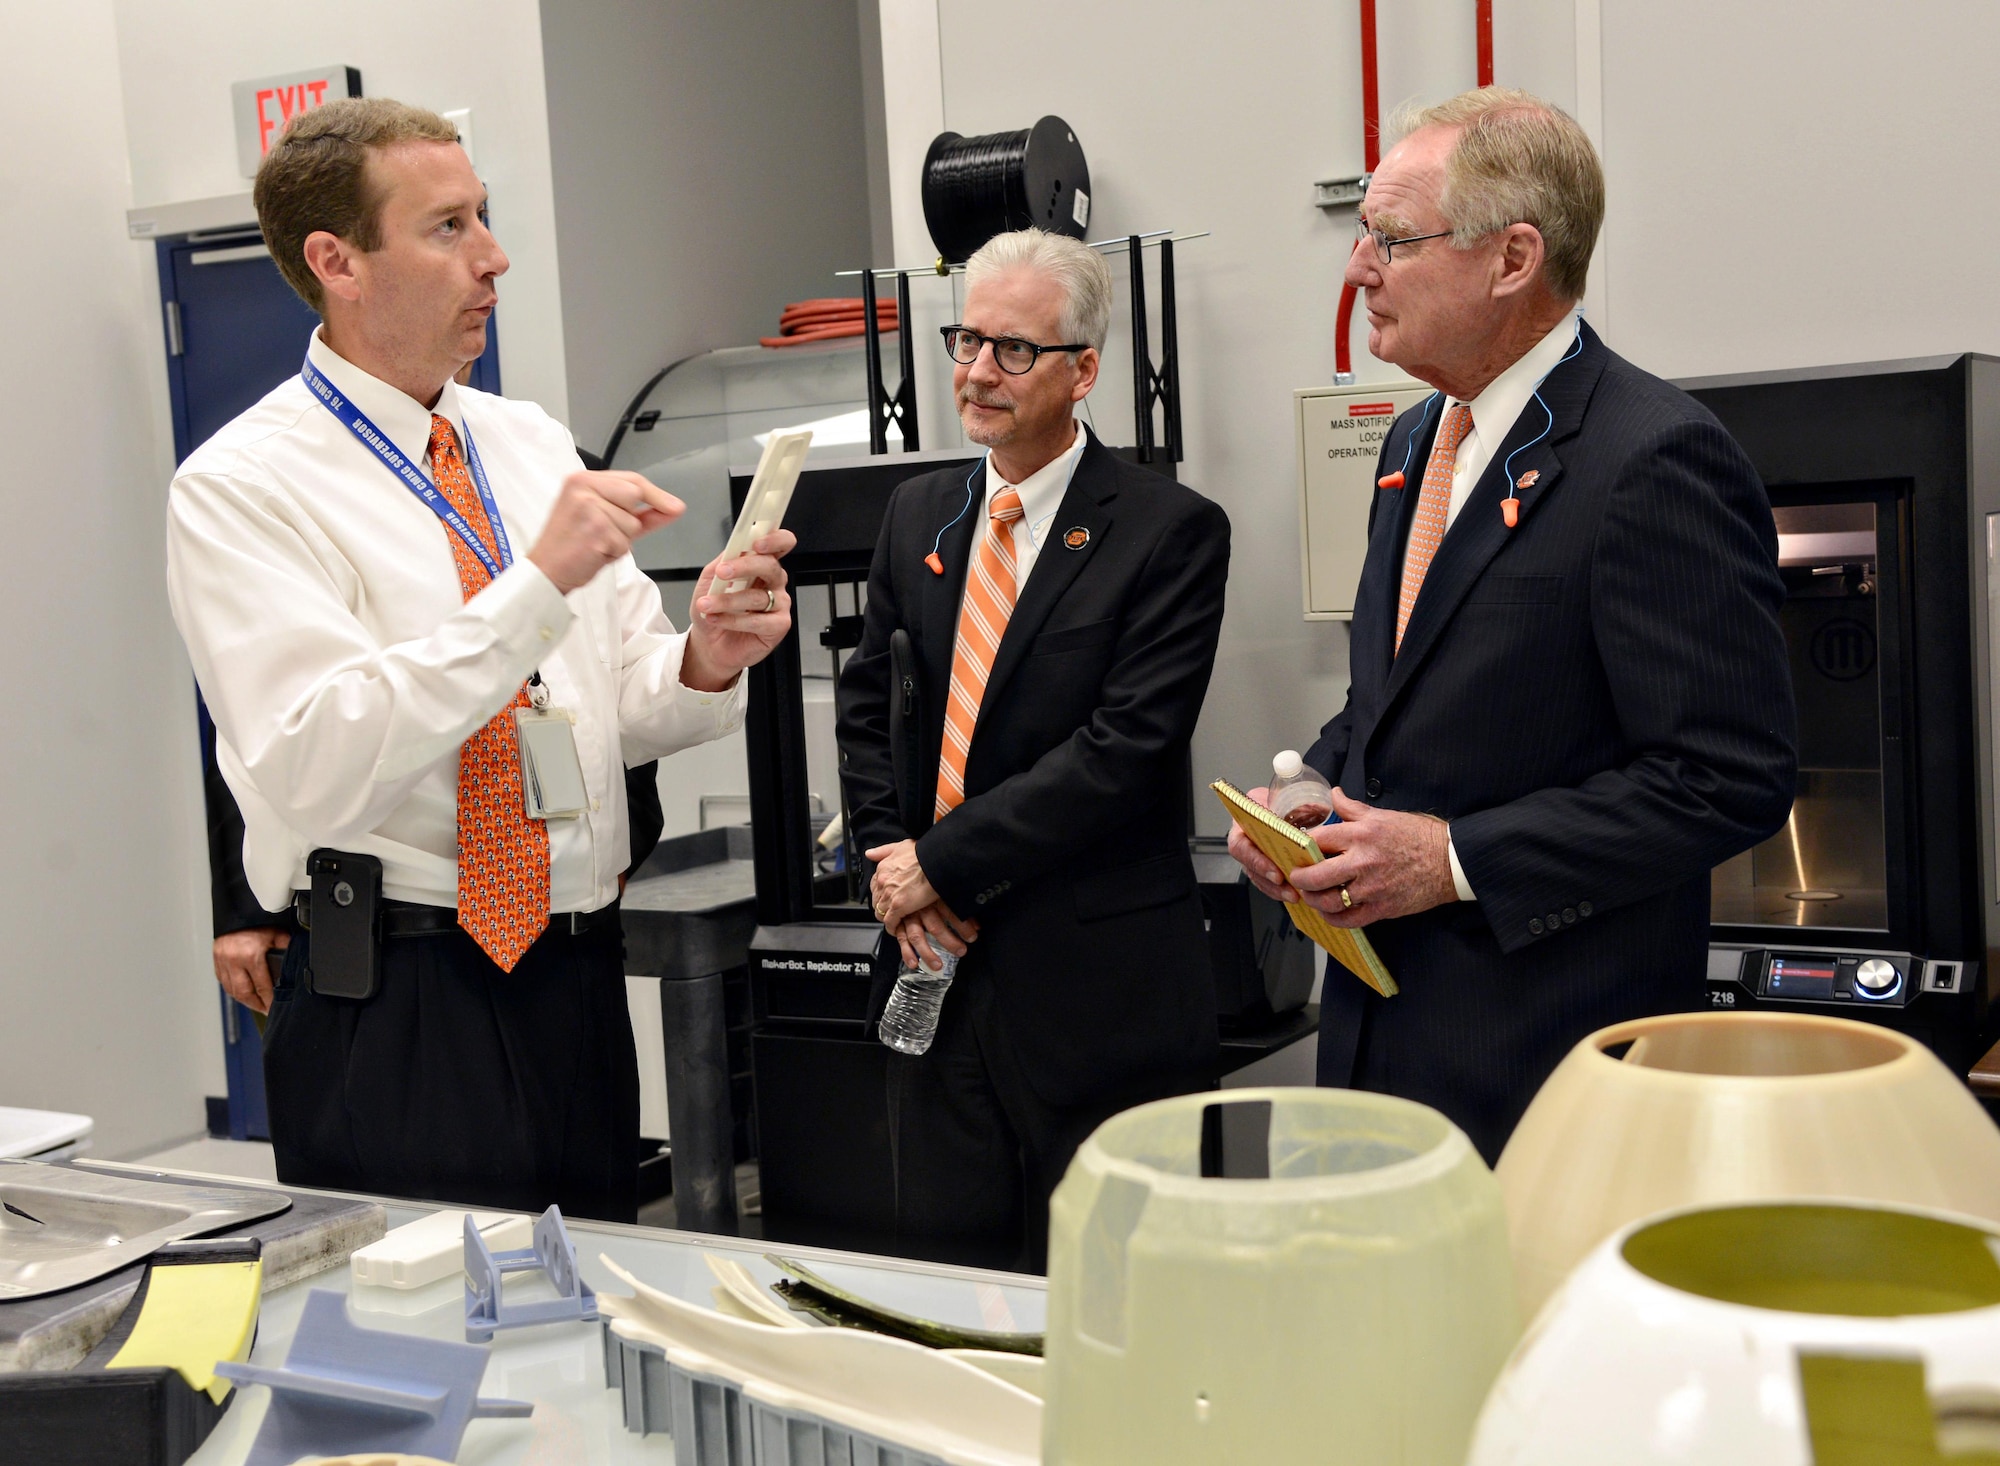 Martin Williams, the 76th Commodities Maintenance Group engineering branch chief, shows parts made using 3-D printing technology in the reverse engineering and critical tooling cell to Dr. Charles Bunting, associate dean of Research and Sponsored Programs at Oklahoma State University, and Dr. Burns Hargis, OSU president, during a tour of OC-ALC engineering and software facilities Oct. 7, 2015. (Air Force photo/Kelly White)